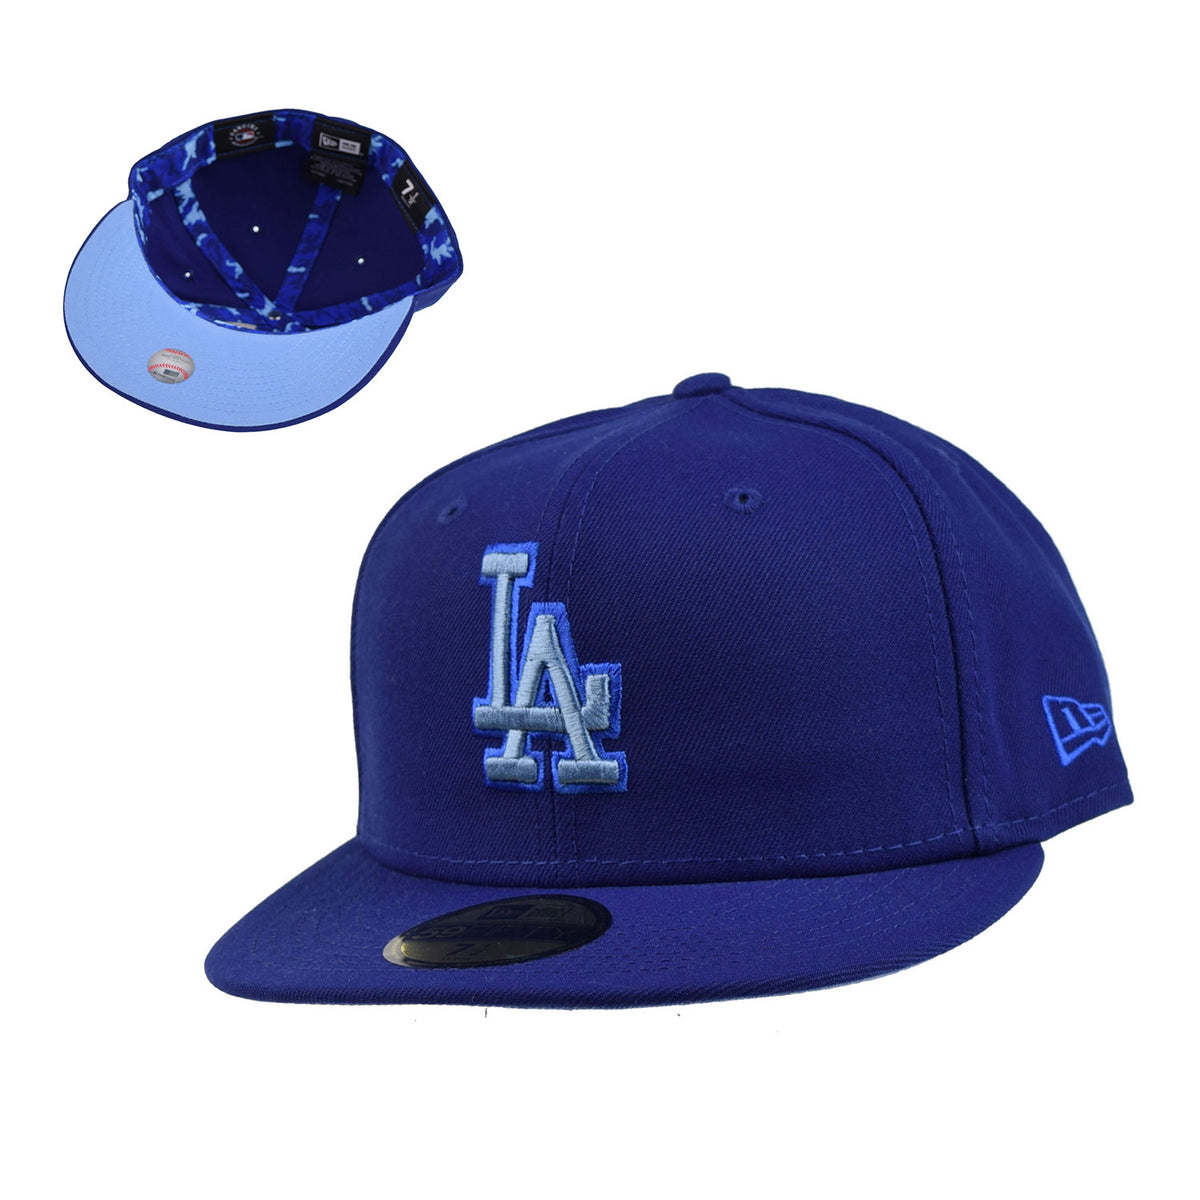 New Era Men's Los Angeles Dodgers Fitted Hat